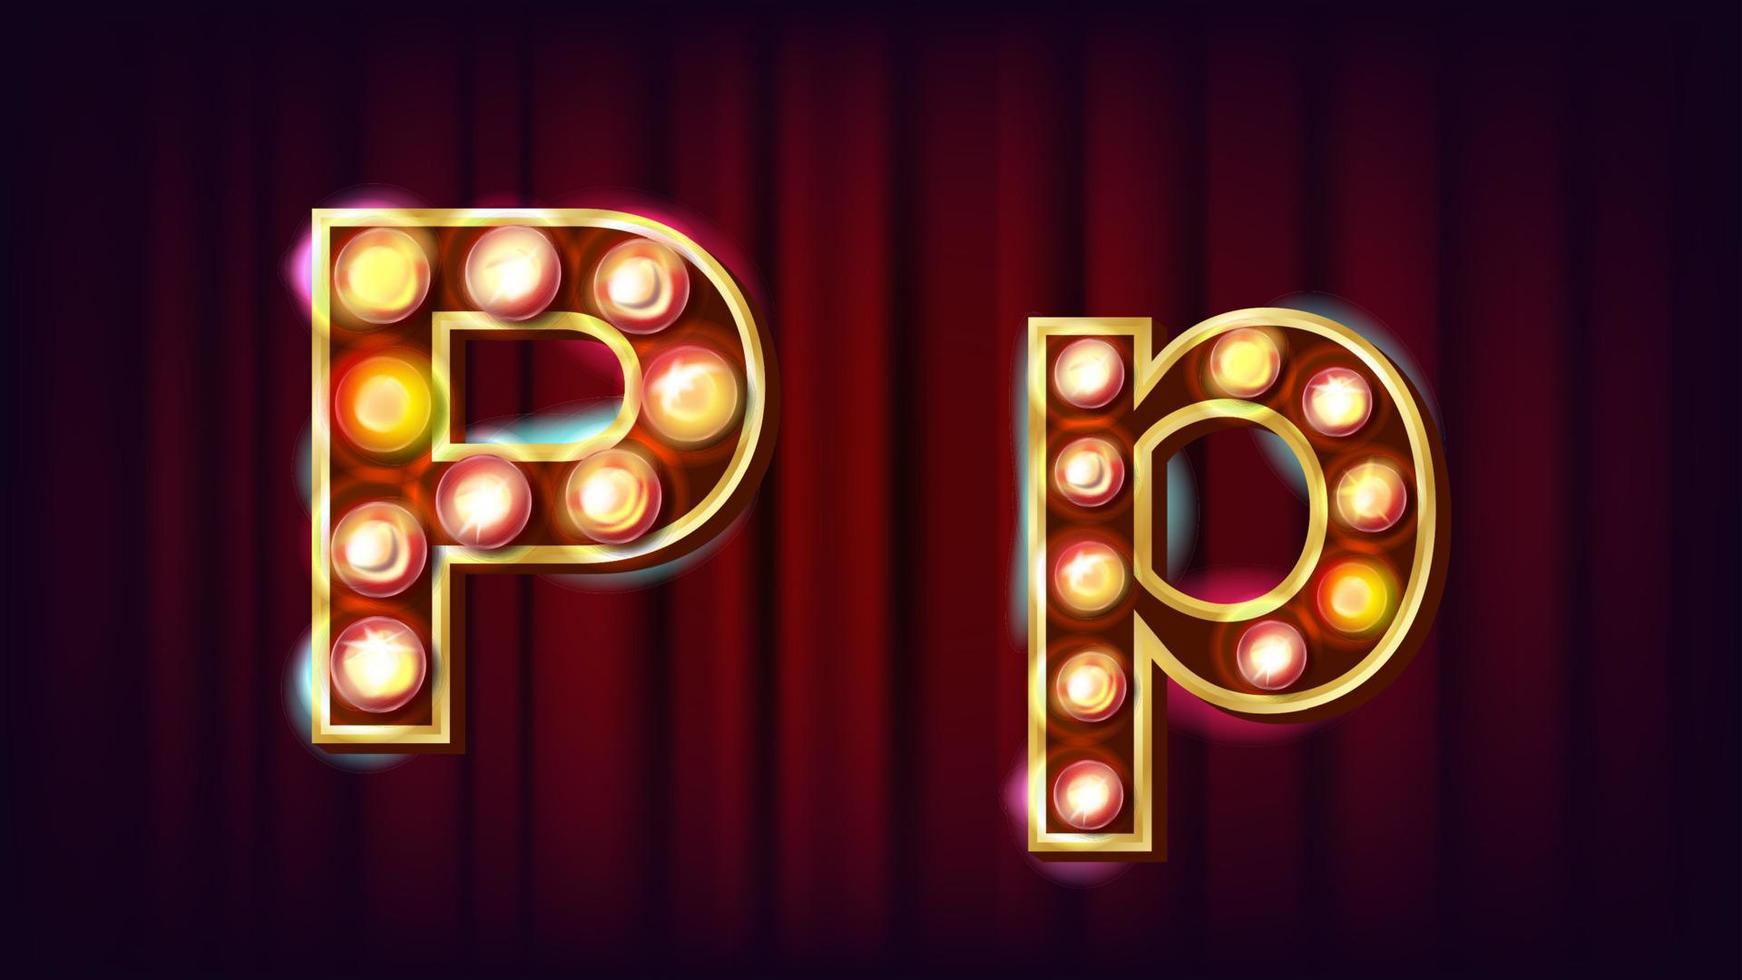 P Letter Vector. Capital, Lowercase. Font Marquee Light Sign. Retro Shine Lamp Bulb Alphabet. 3D Electric Glowing Digit. Vintage Gold Illuminated Light. Carnival, Circus, Casino Style. Illustration vector